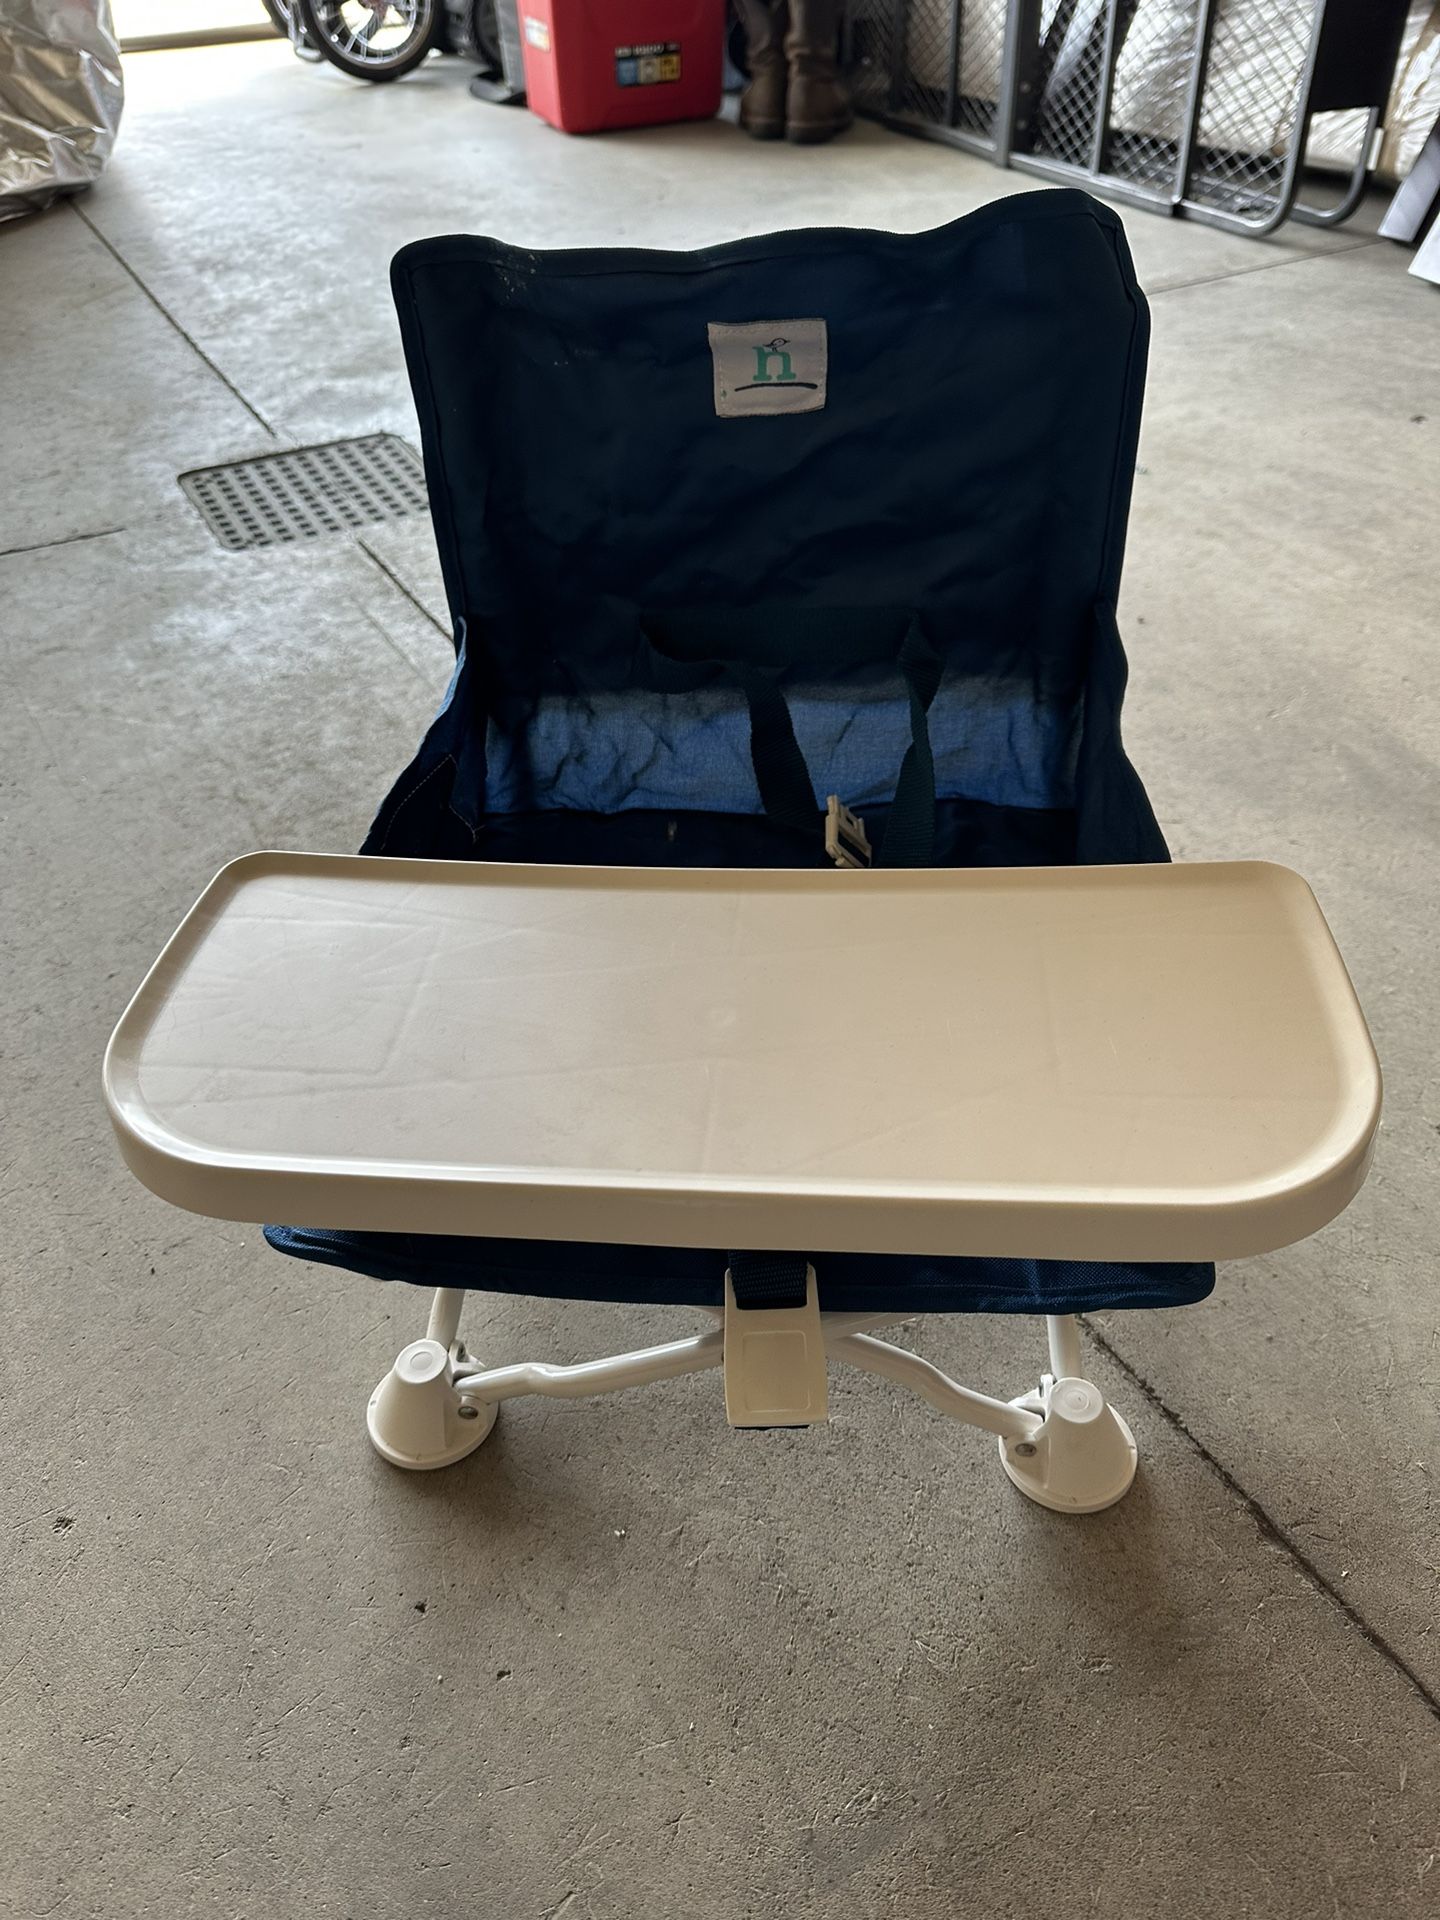 Folding Toddler Chair With Removable Tray 